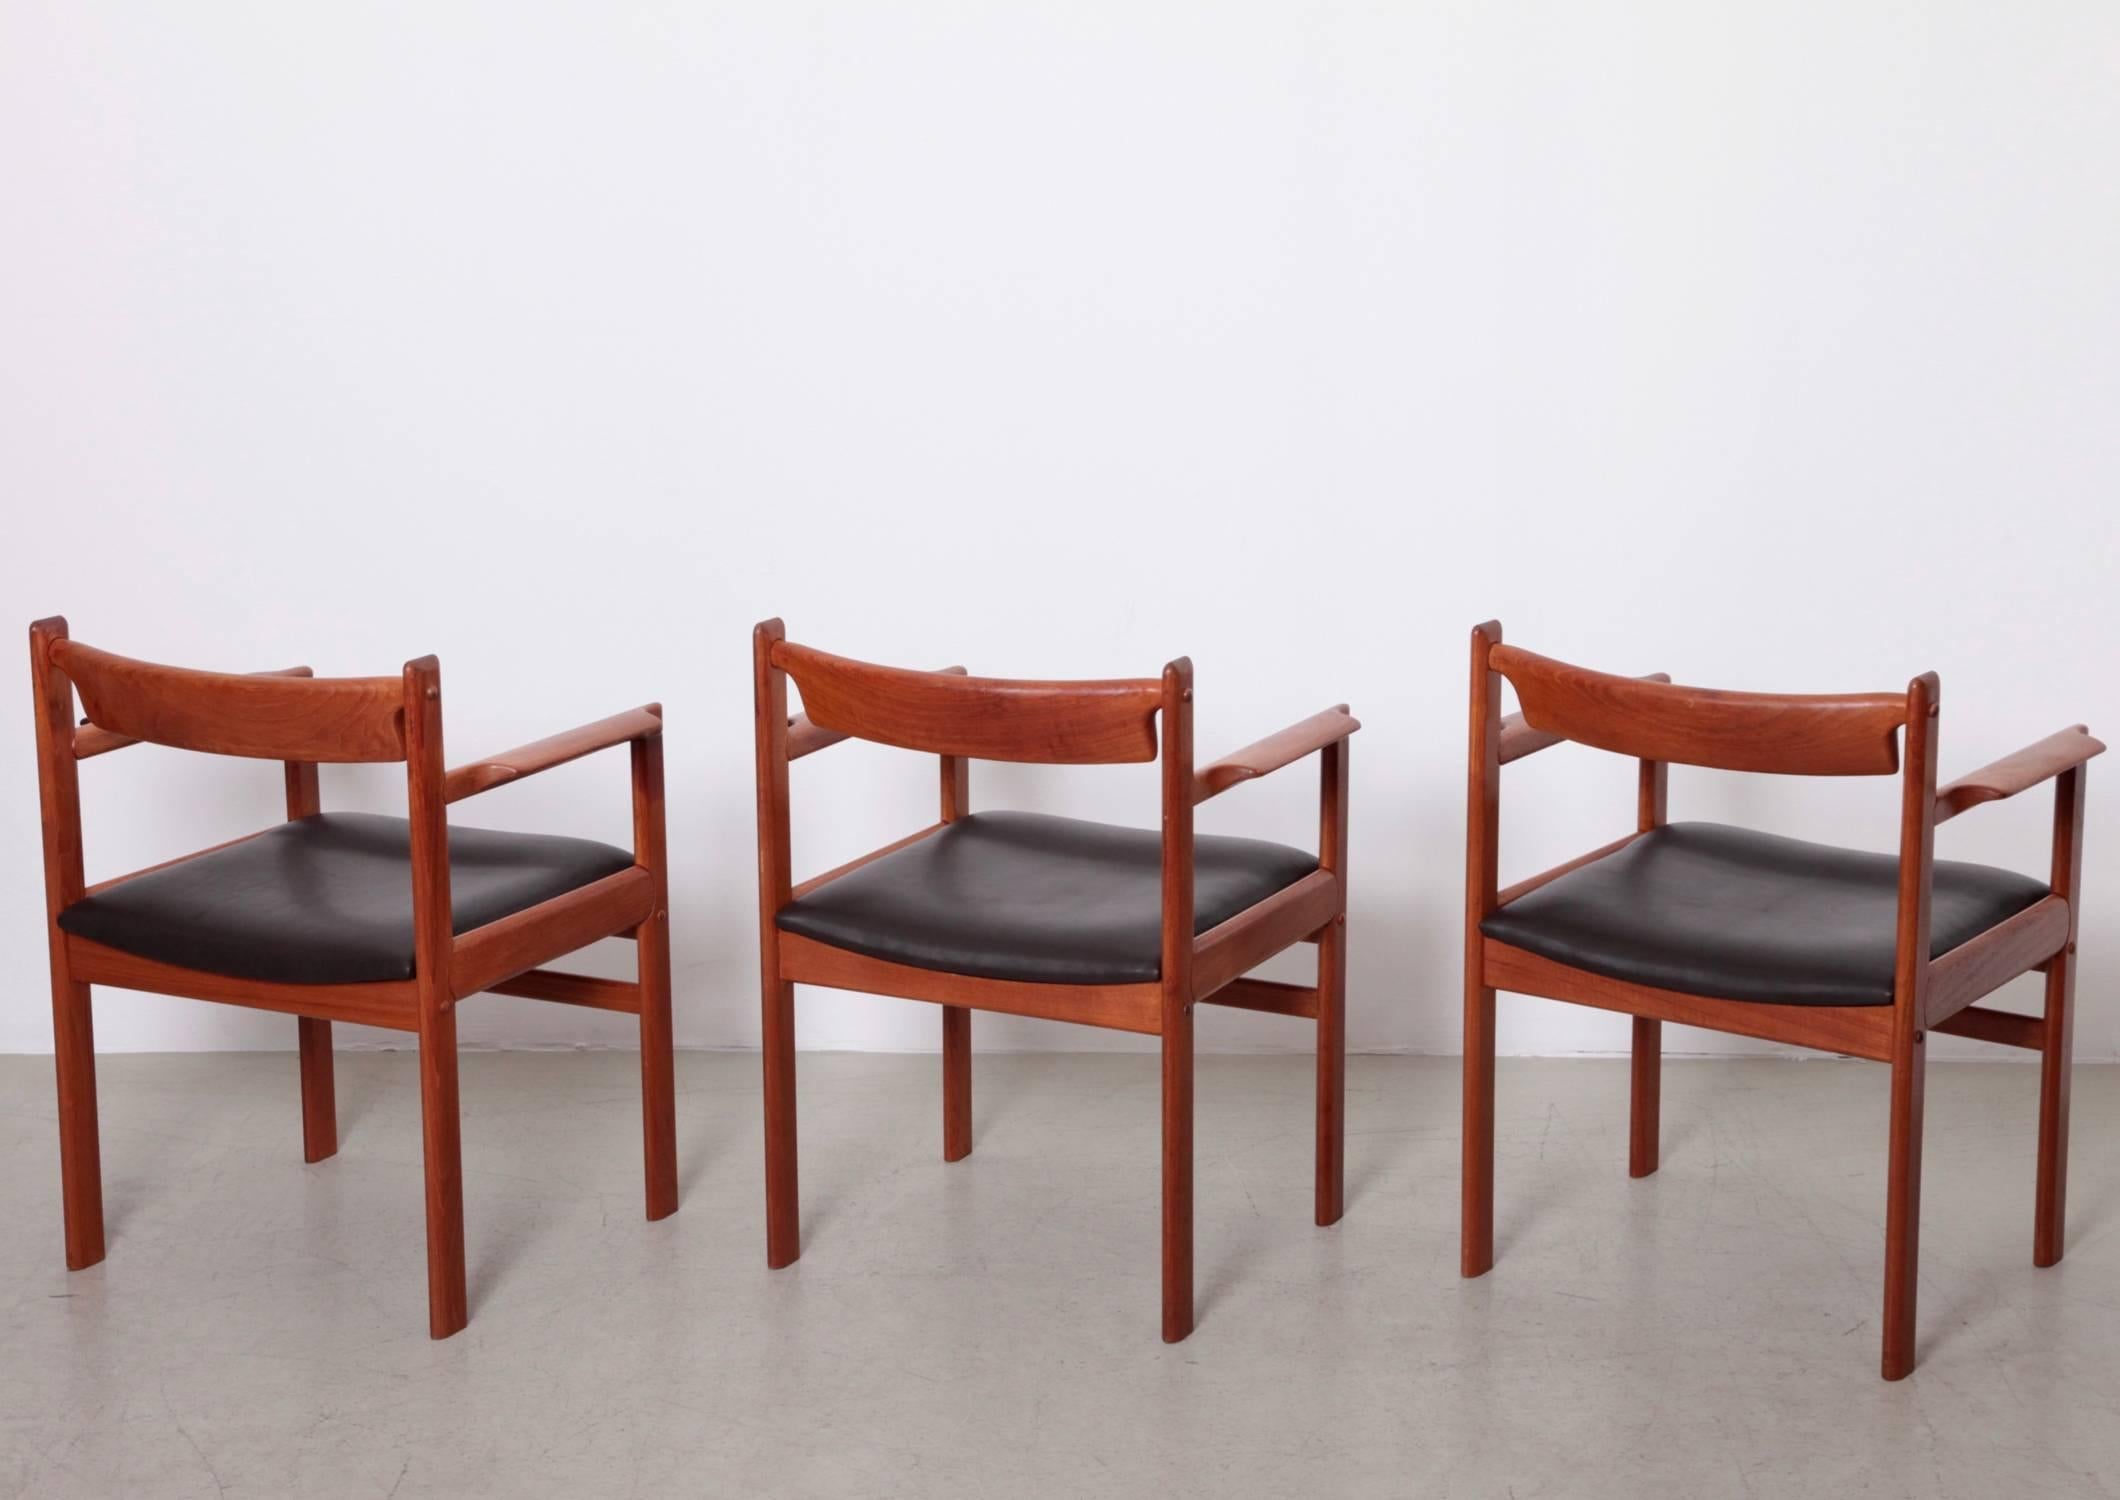 Restored set of three Danish armchairs in solid teak and high quality aniline leather.

